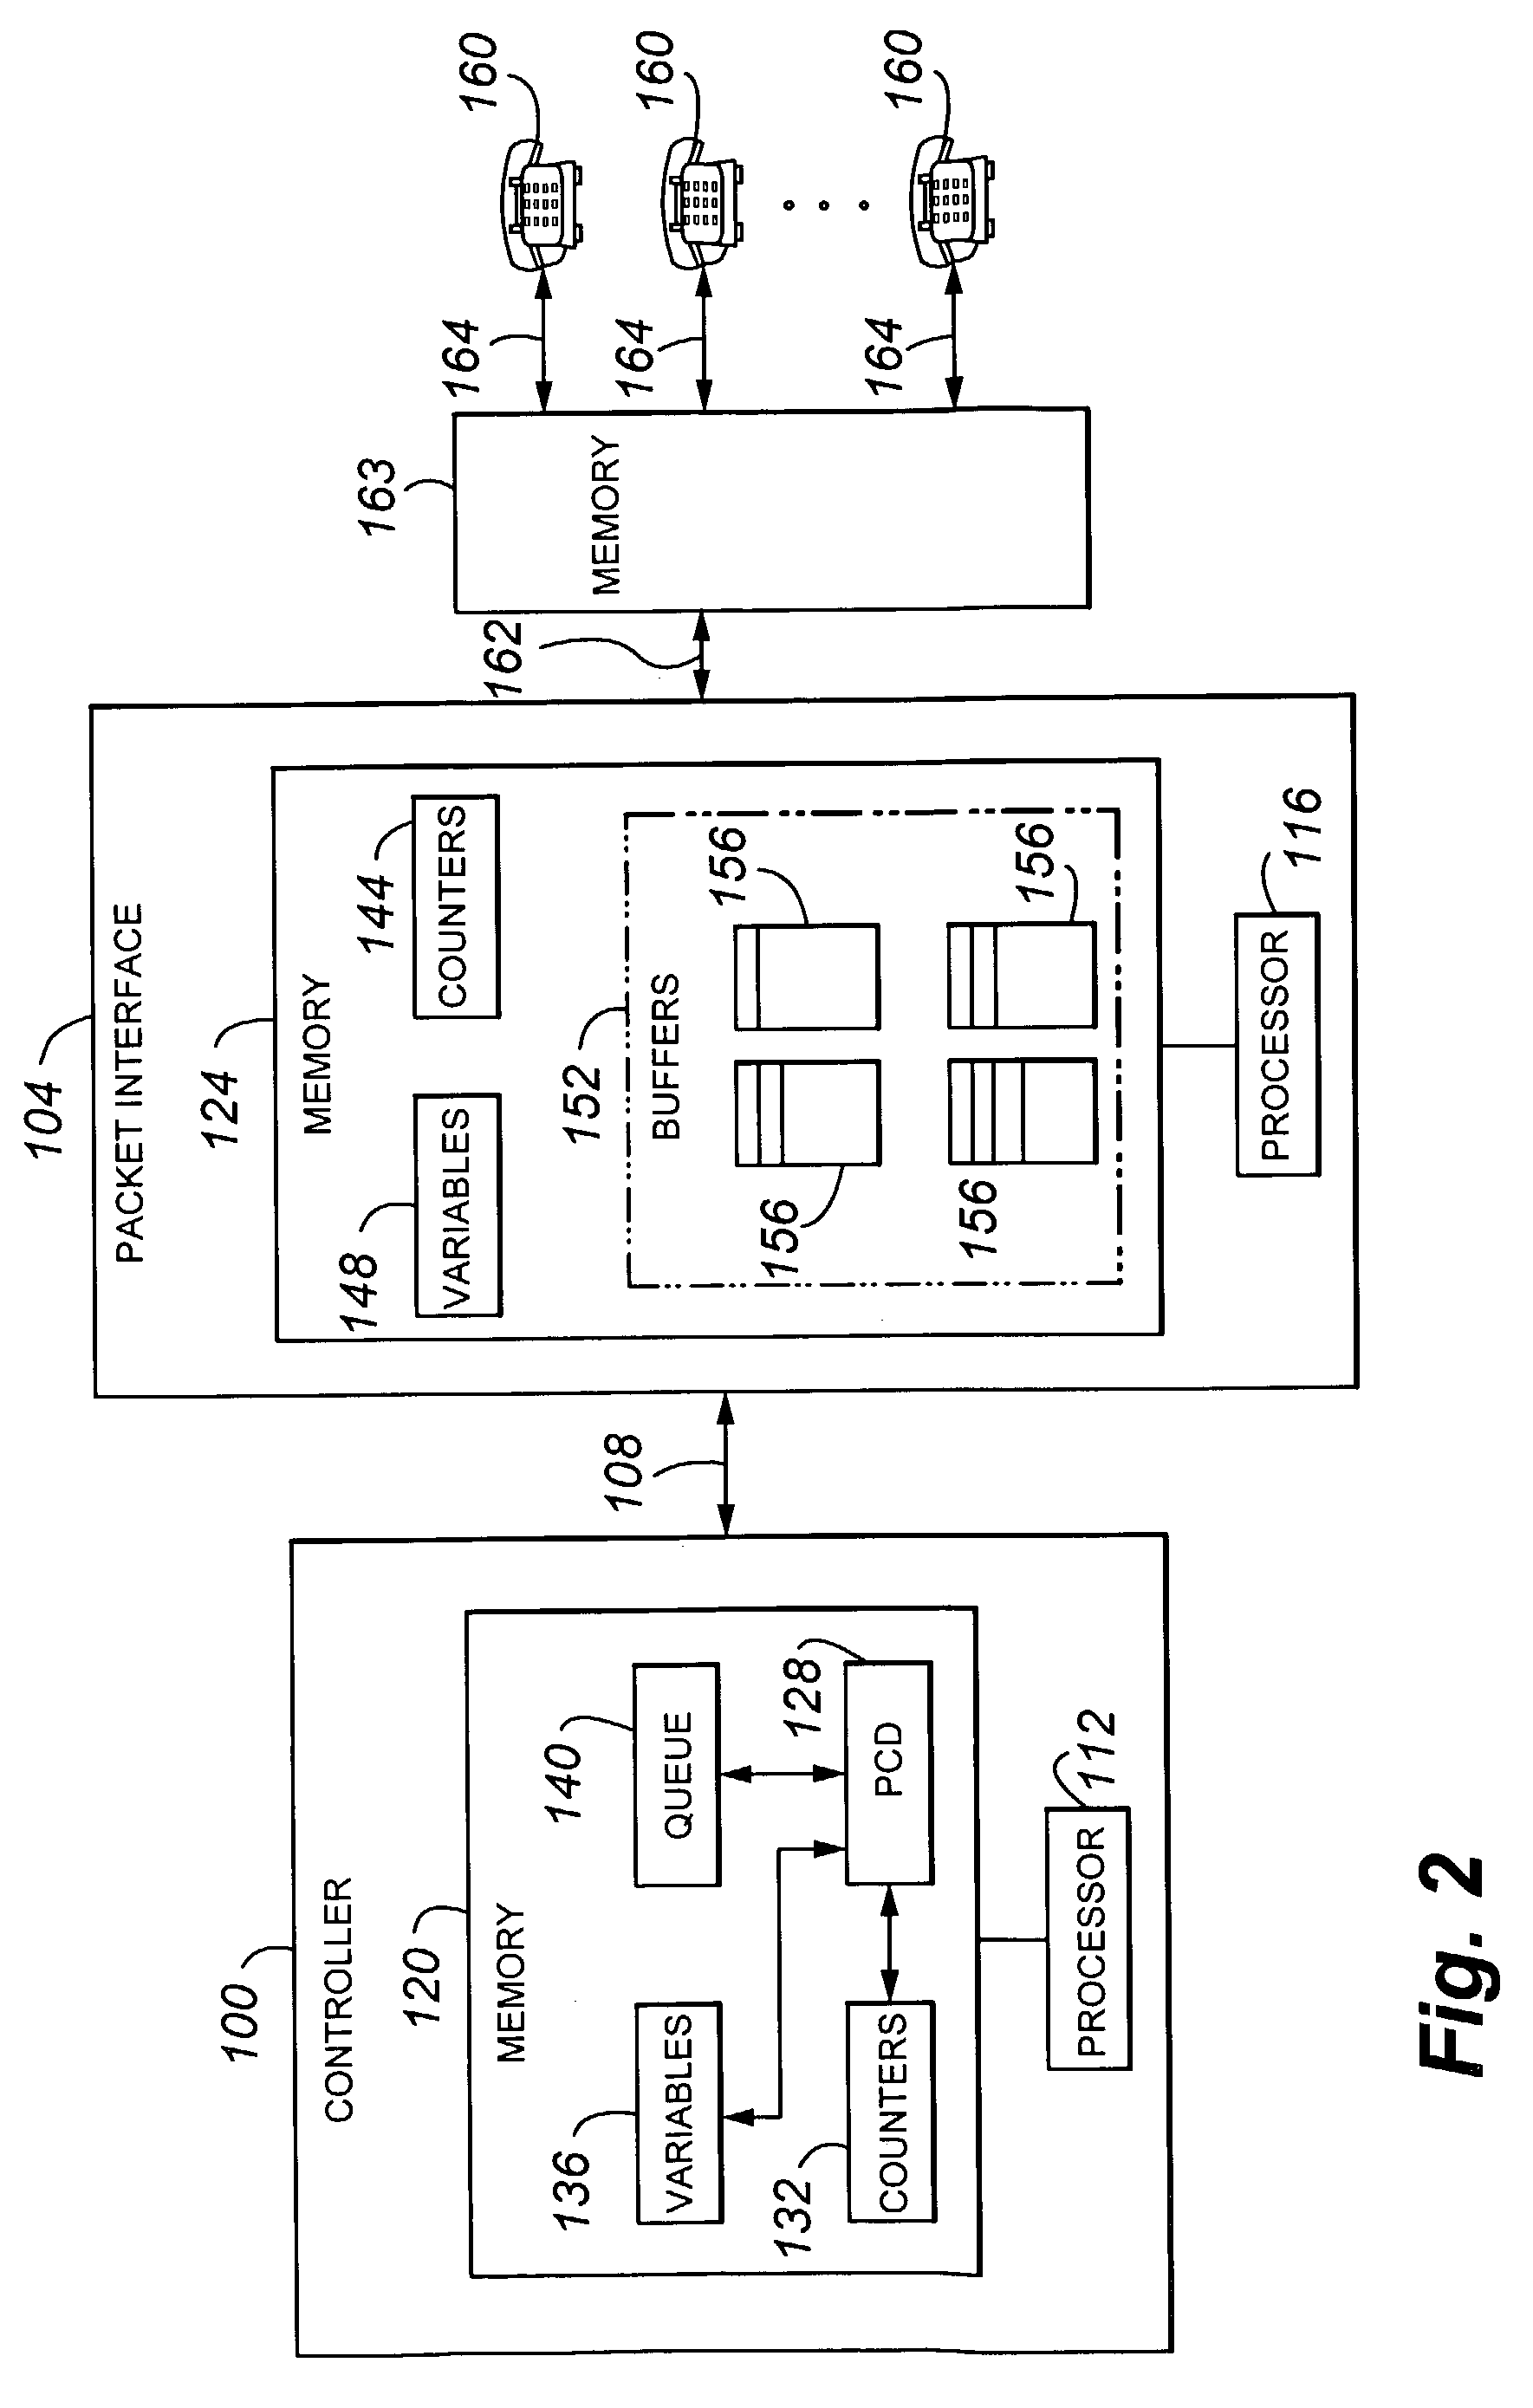 Message format and flow control for replacement of the packet control driver/packet interface dual port RAM communication